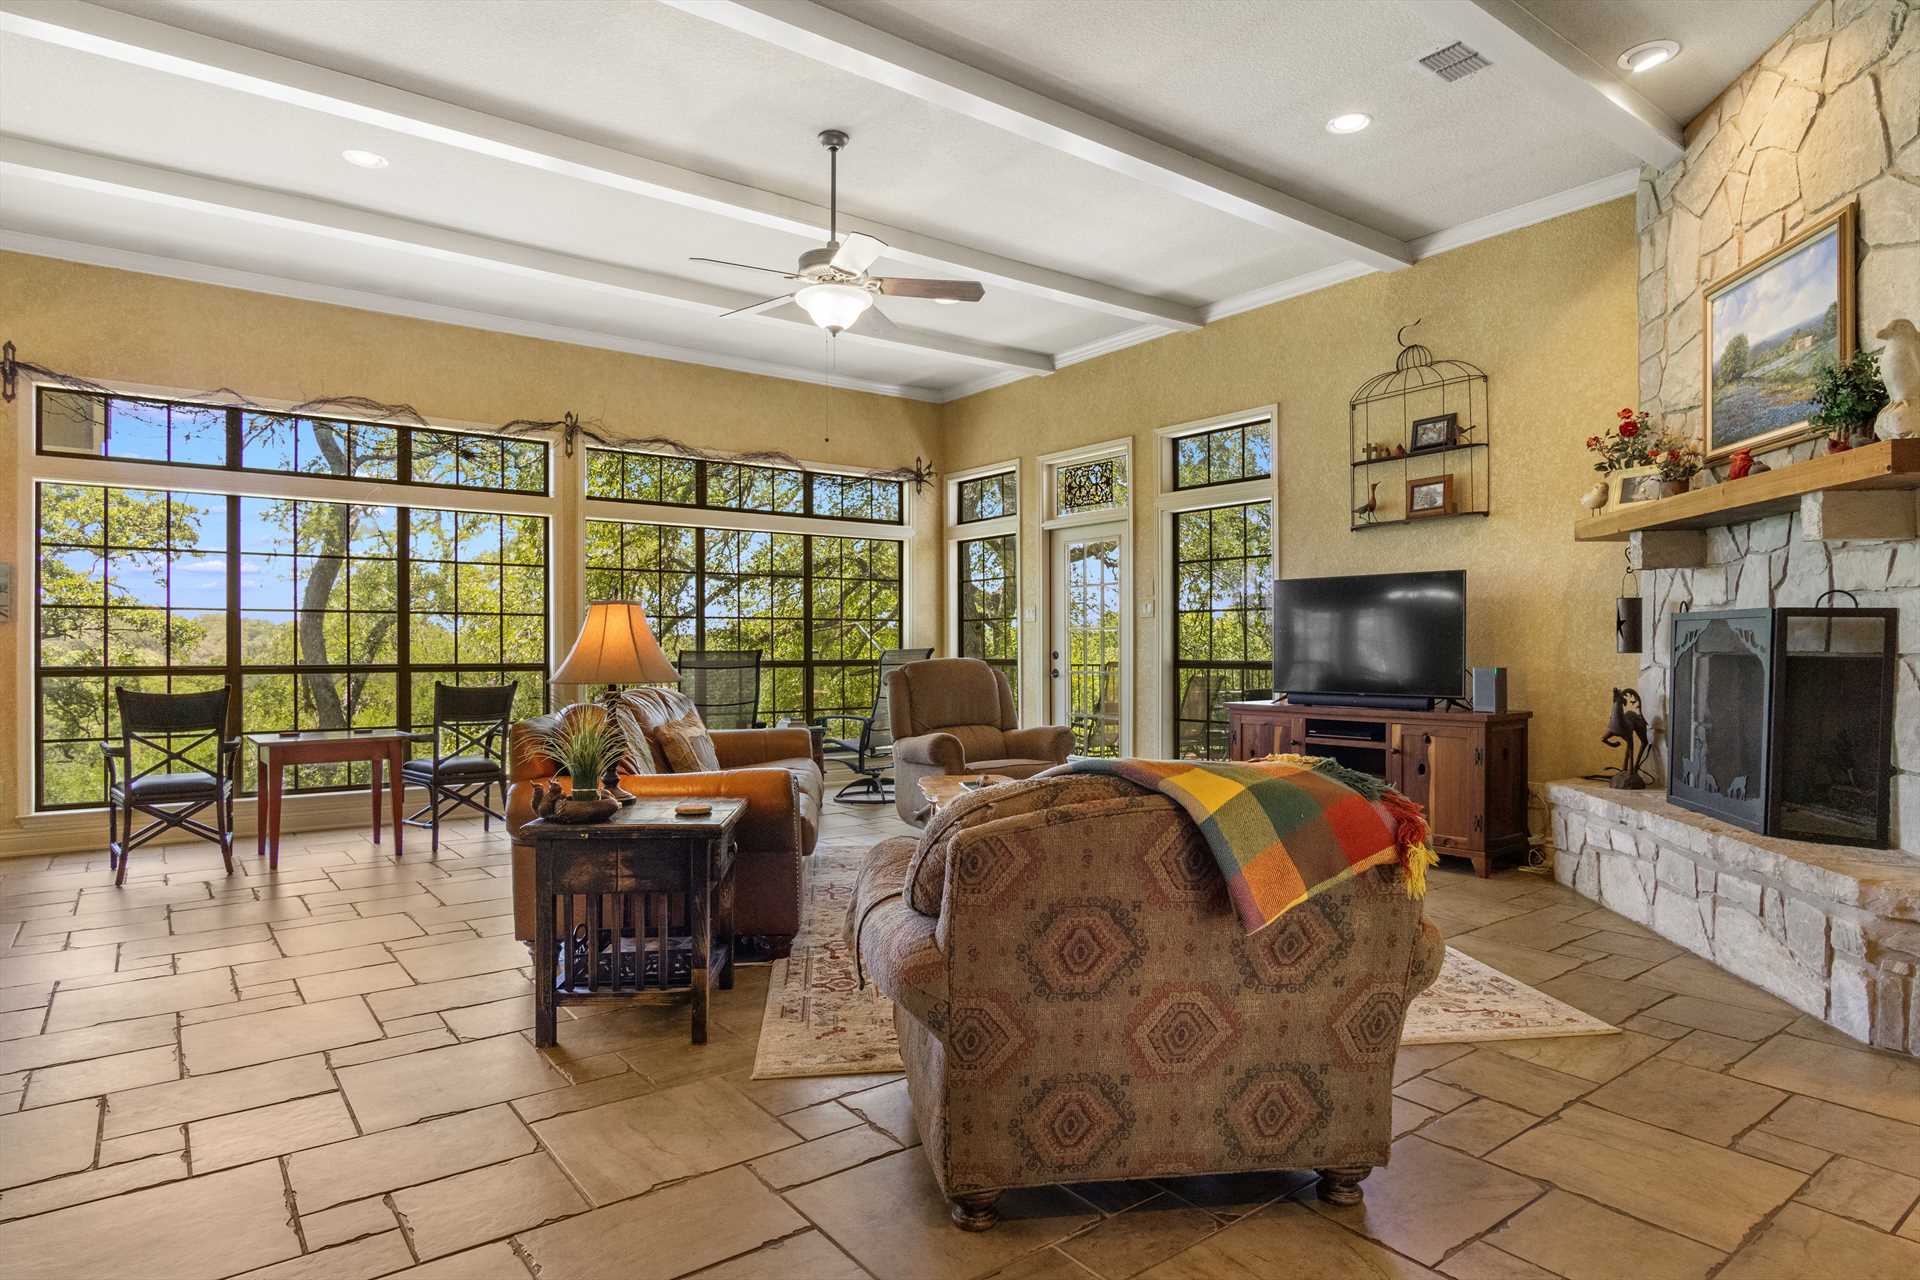                                                 You don't have to go outside for breathtaking Hill Country views! Look at the panorama you can see from the living area.